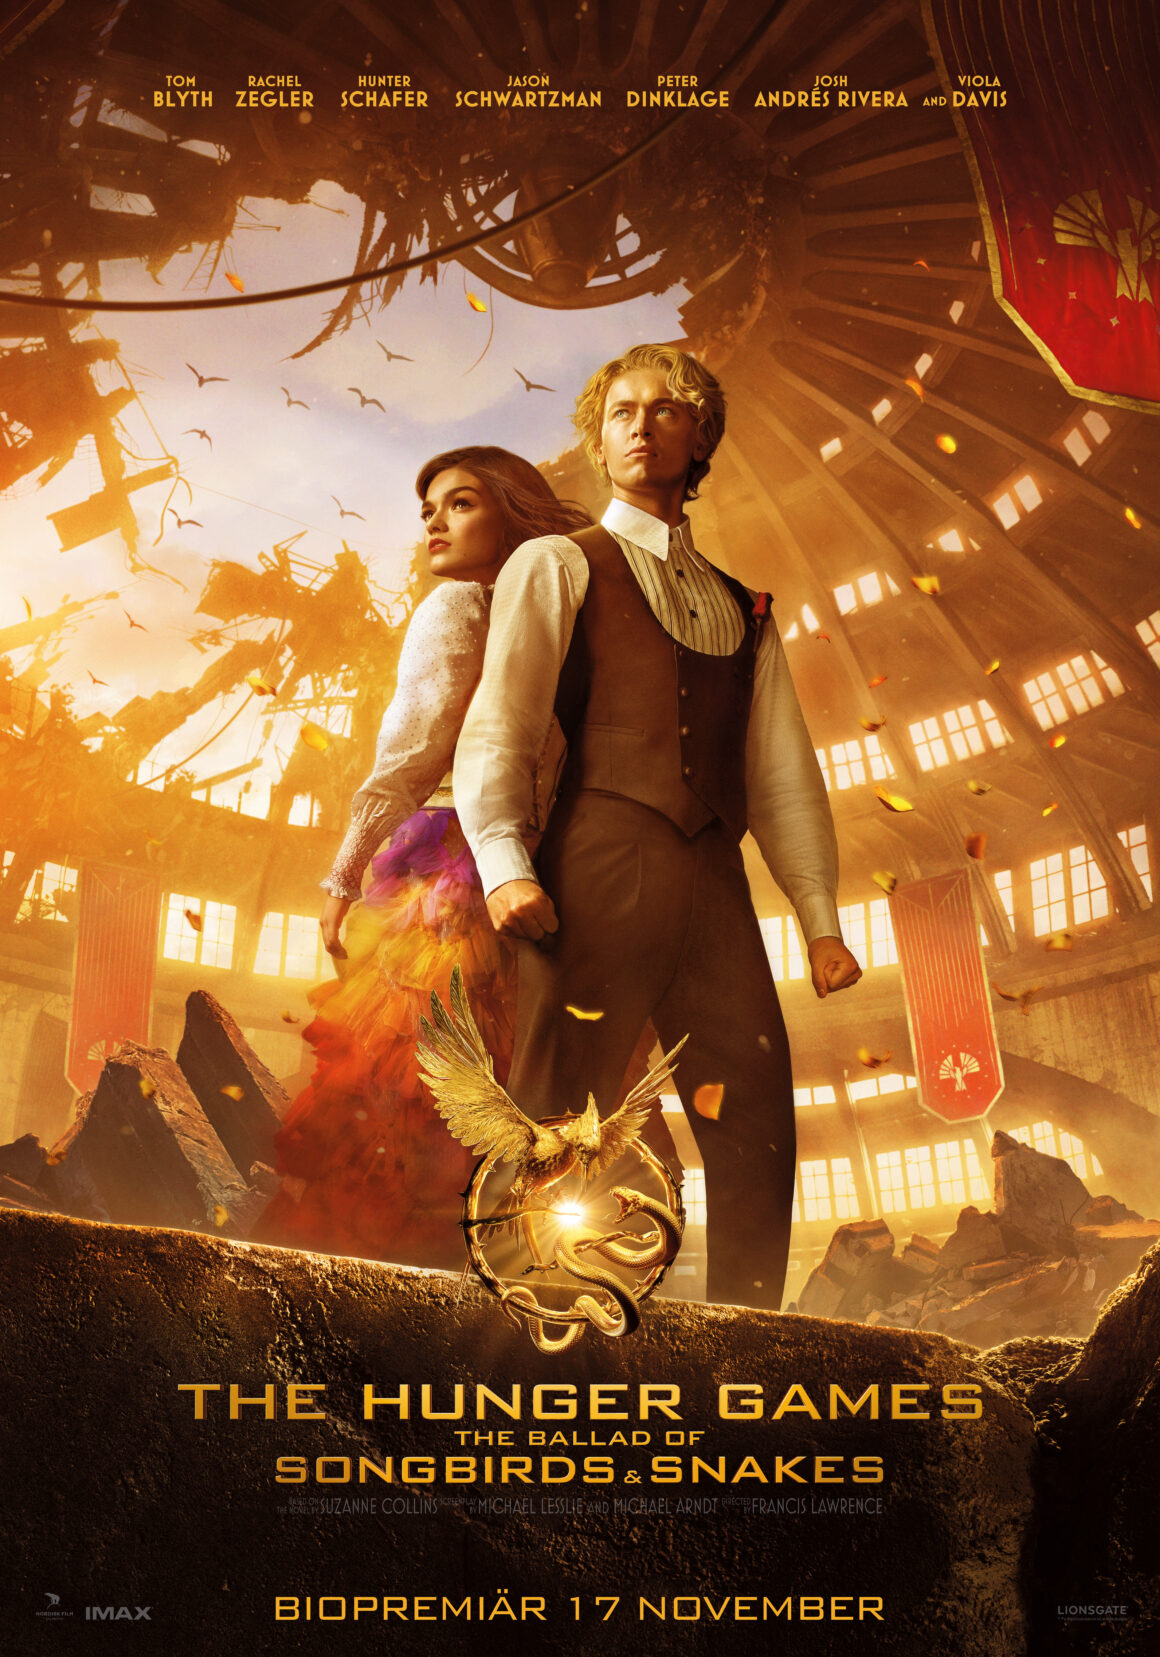 The Hunger Games – The Ballad of Songbirds and Snakes